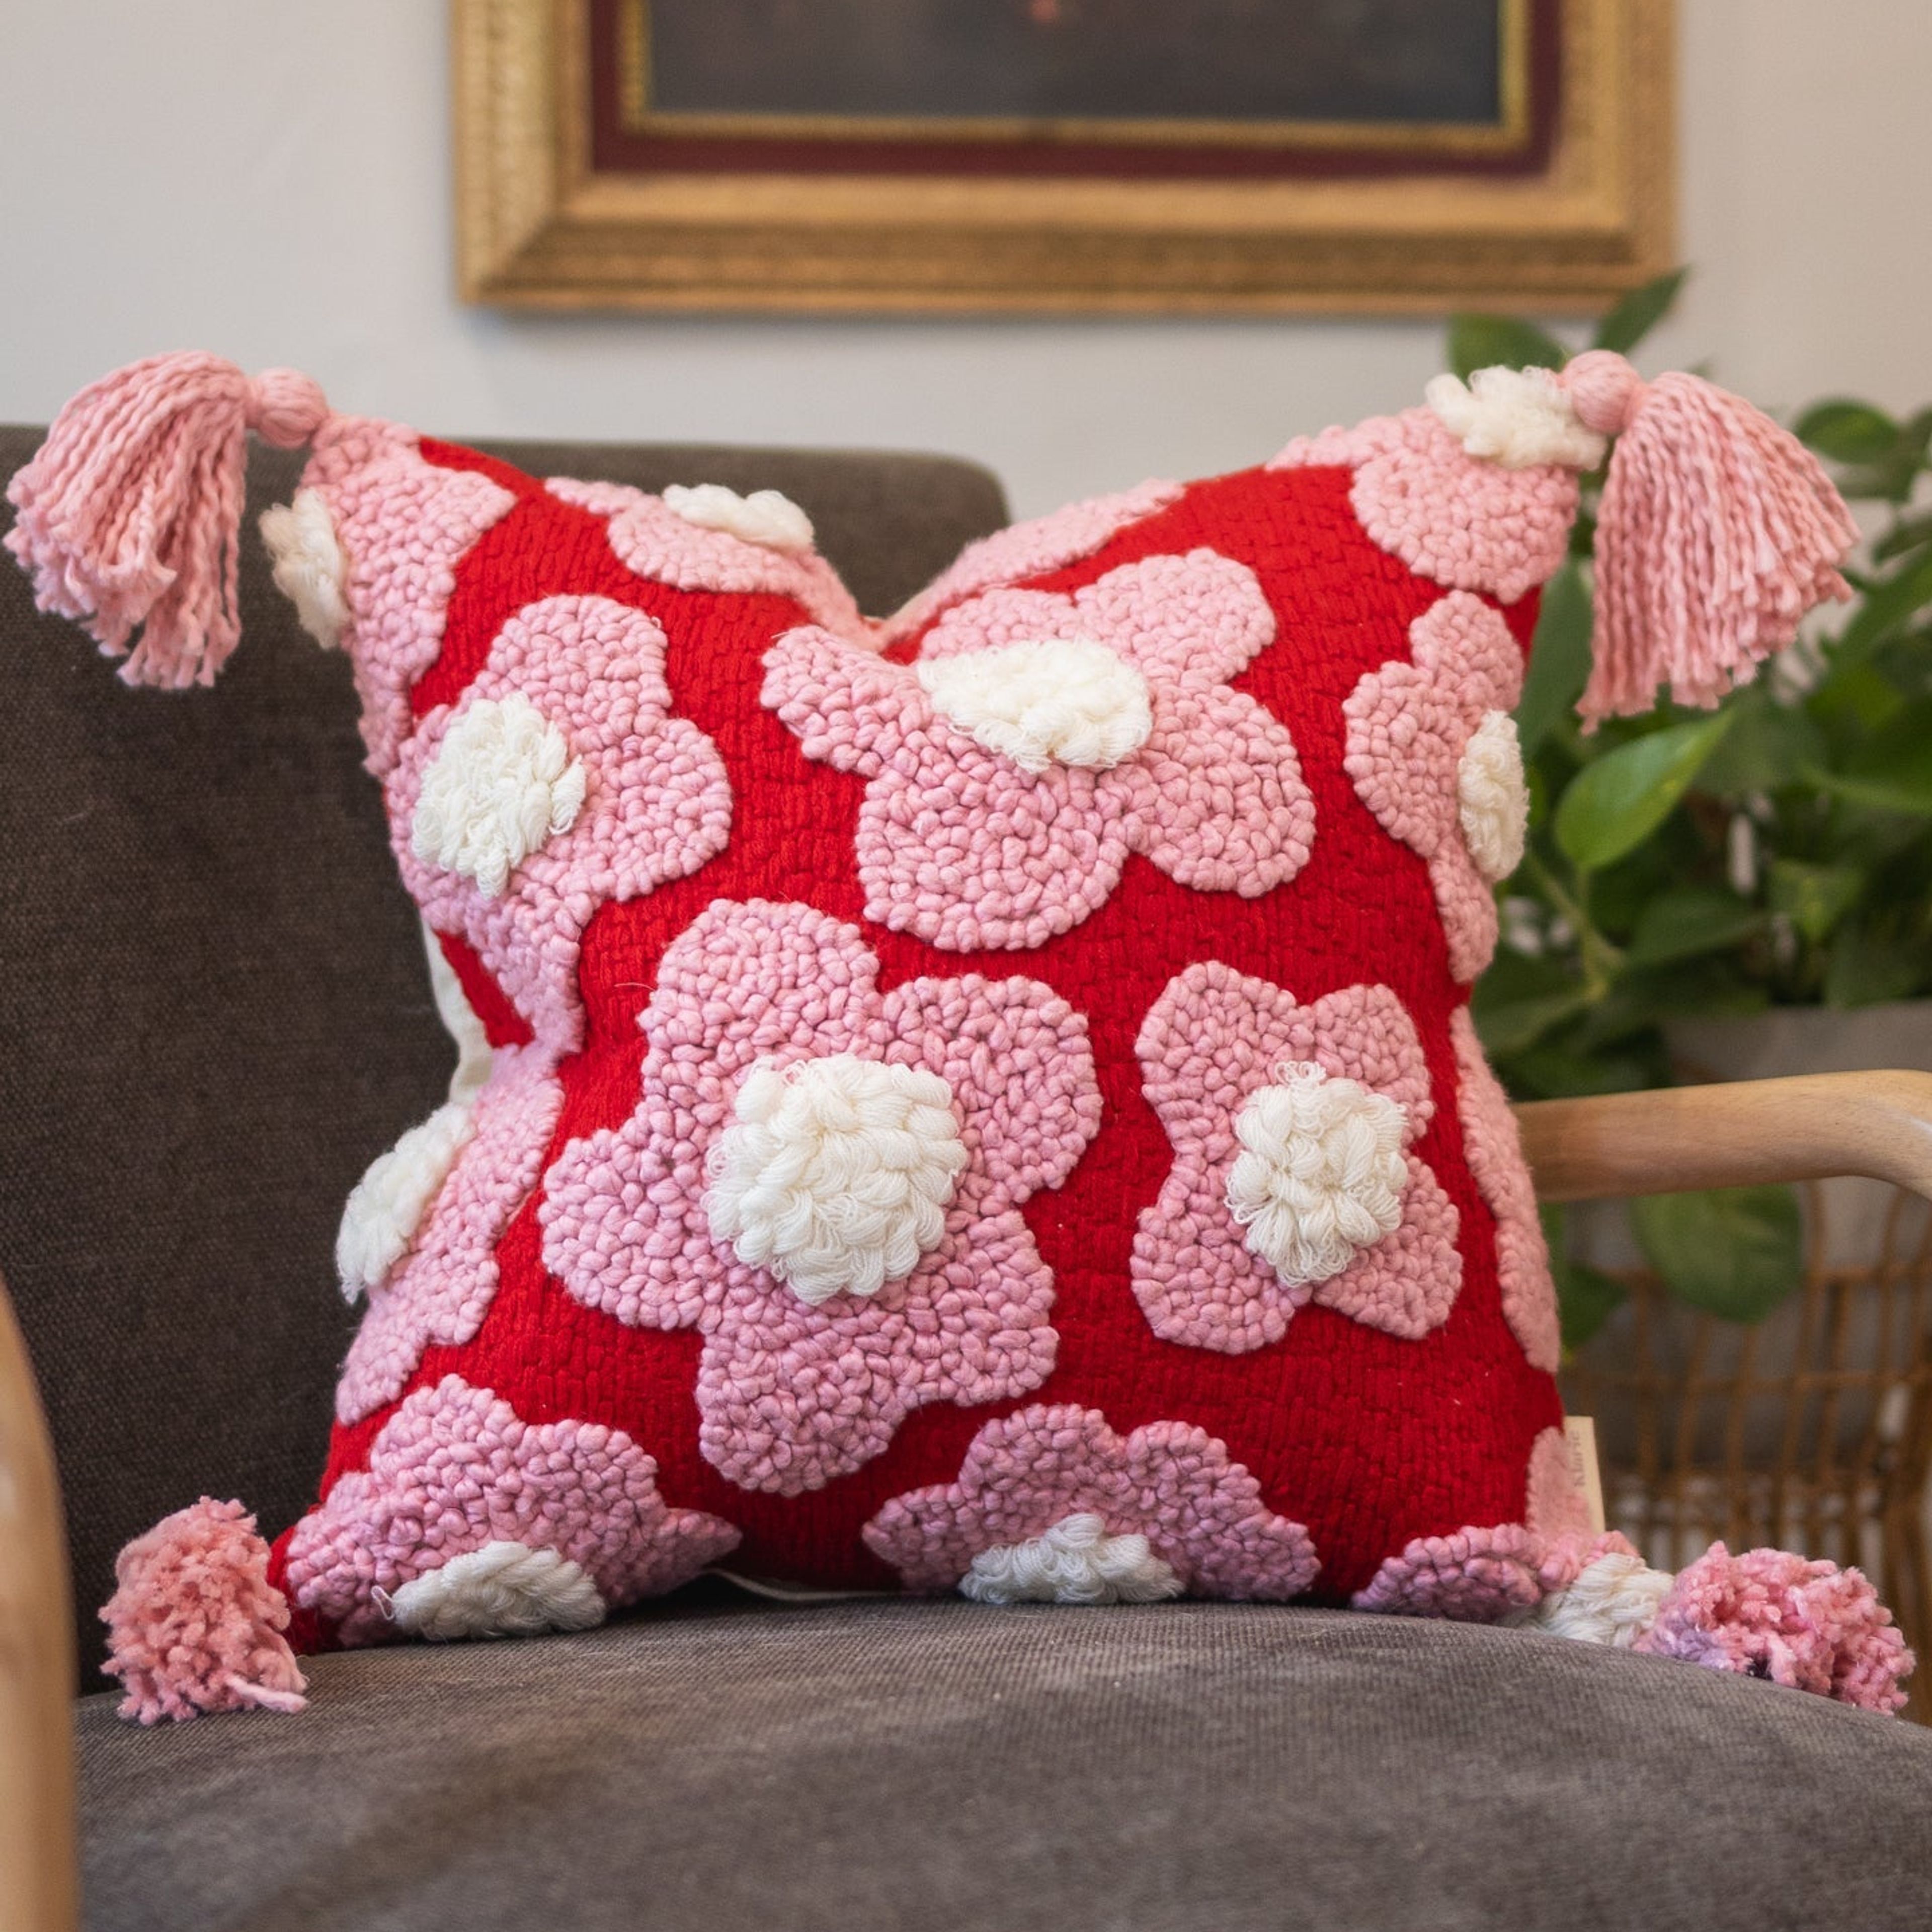 Blossom Organic Cotton Flower Throw Pillow $100 Today Only